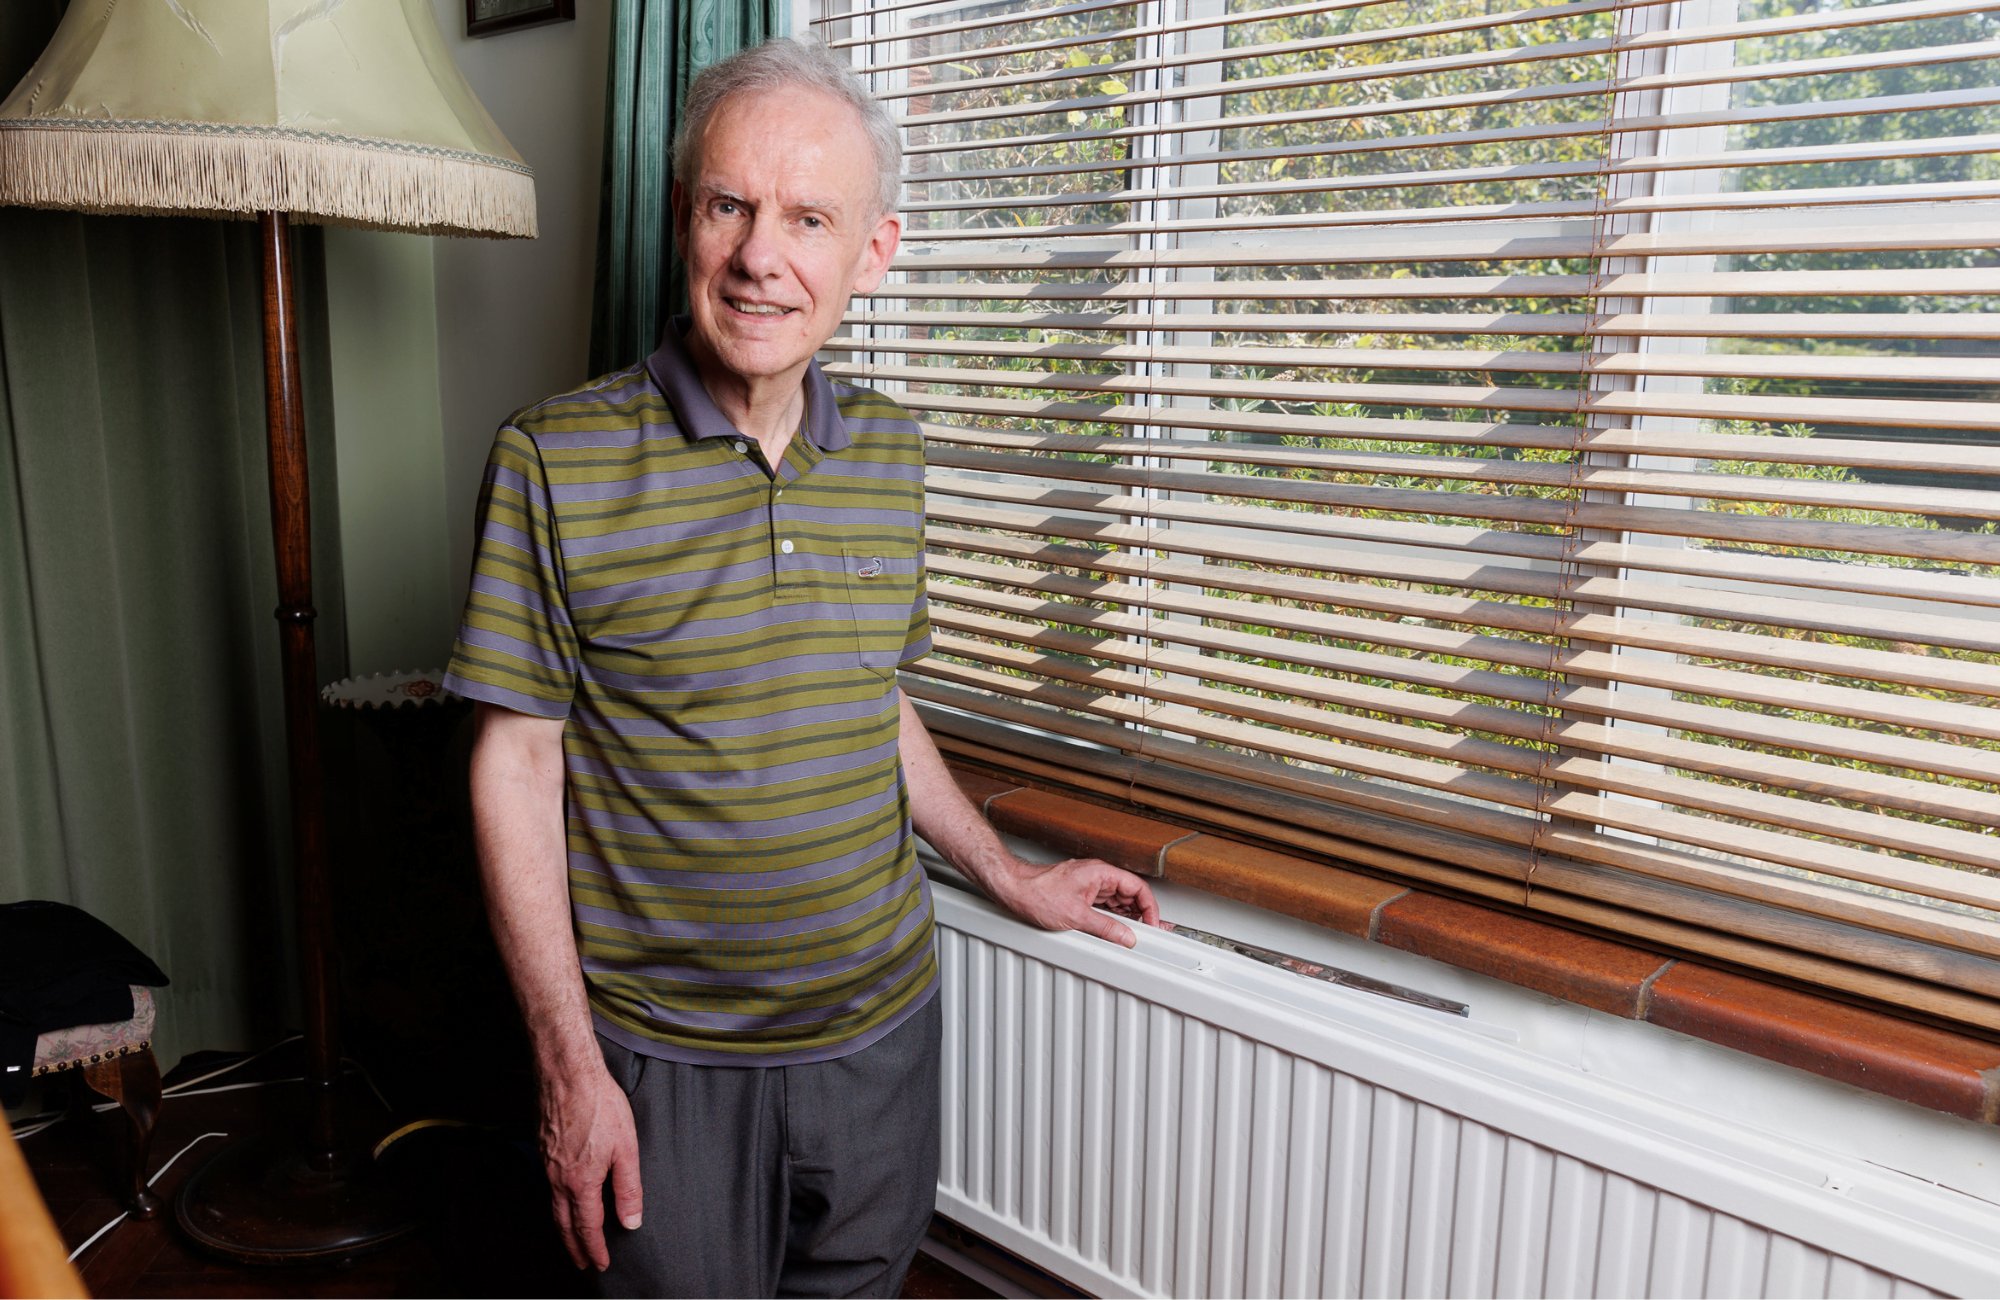 Peter stood in front of a window with his hand on a radiator underneath the window.